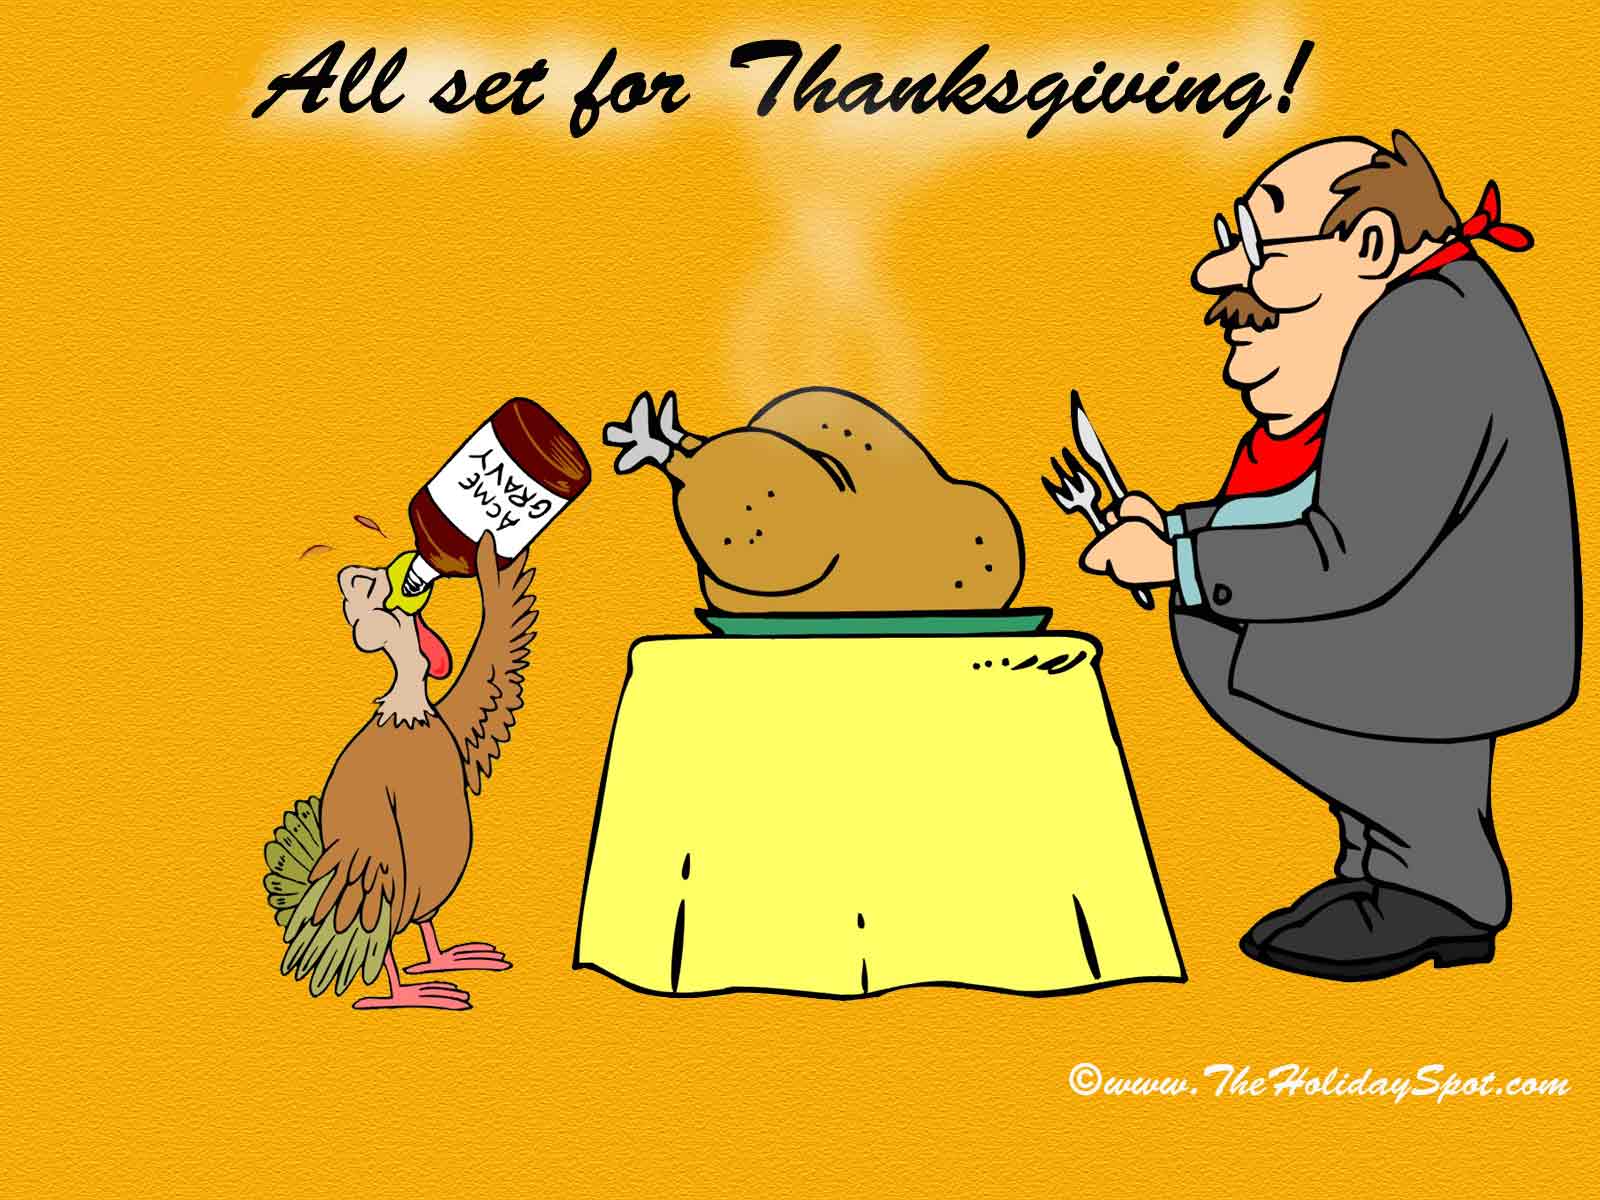 Free Funny Thanksgiving Wallpapers - Wallpaper Cave